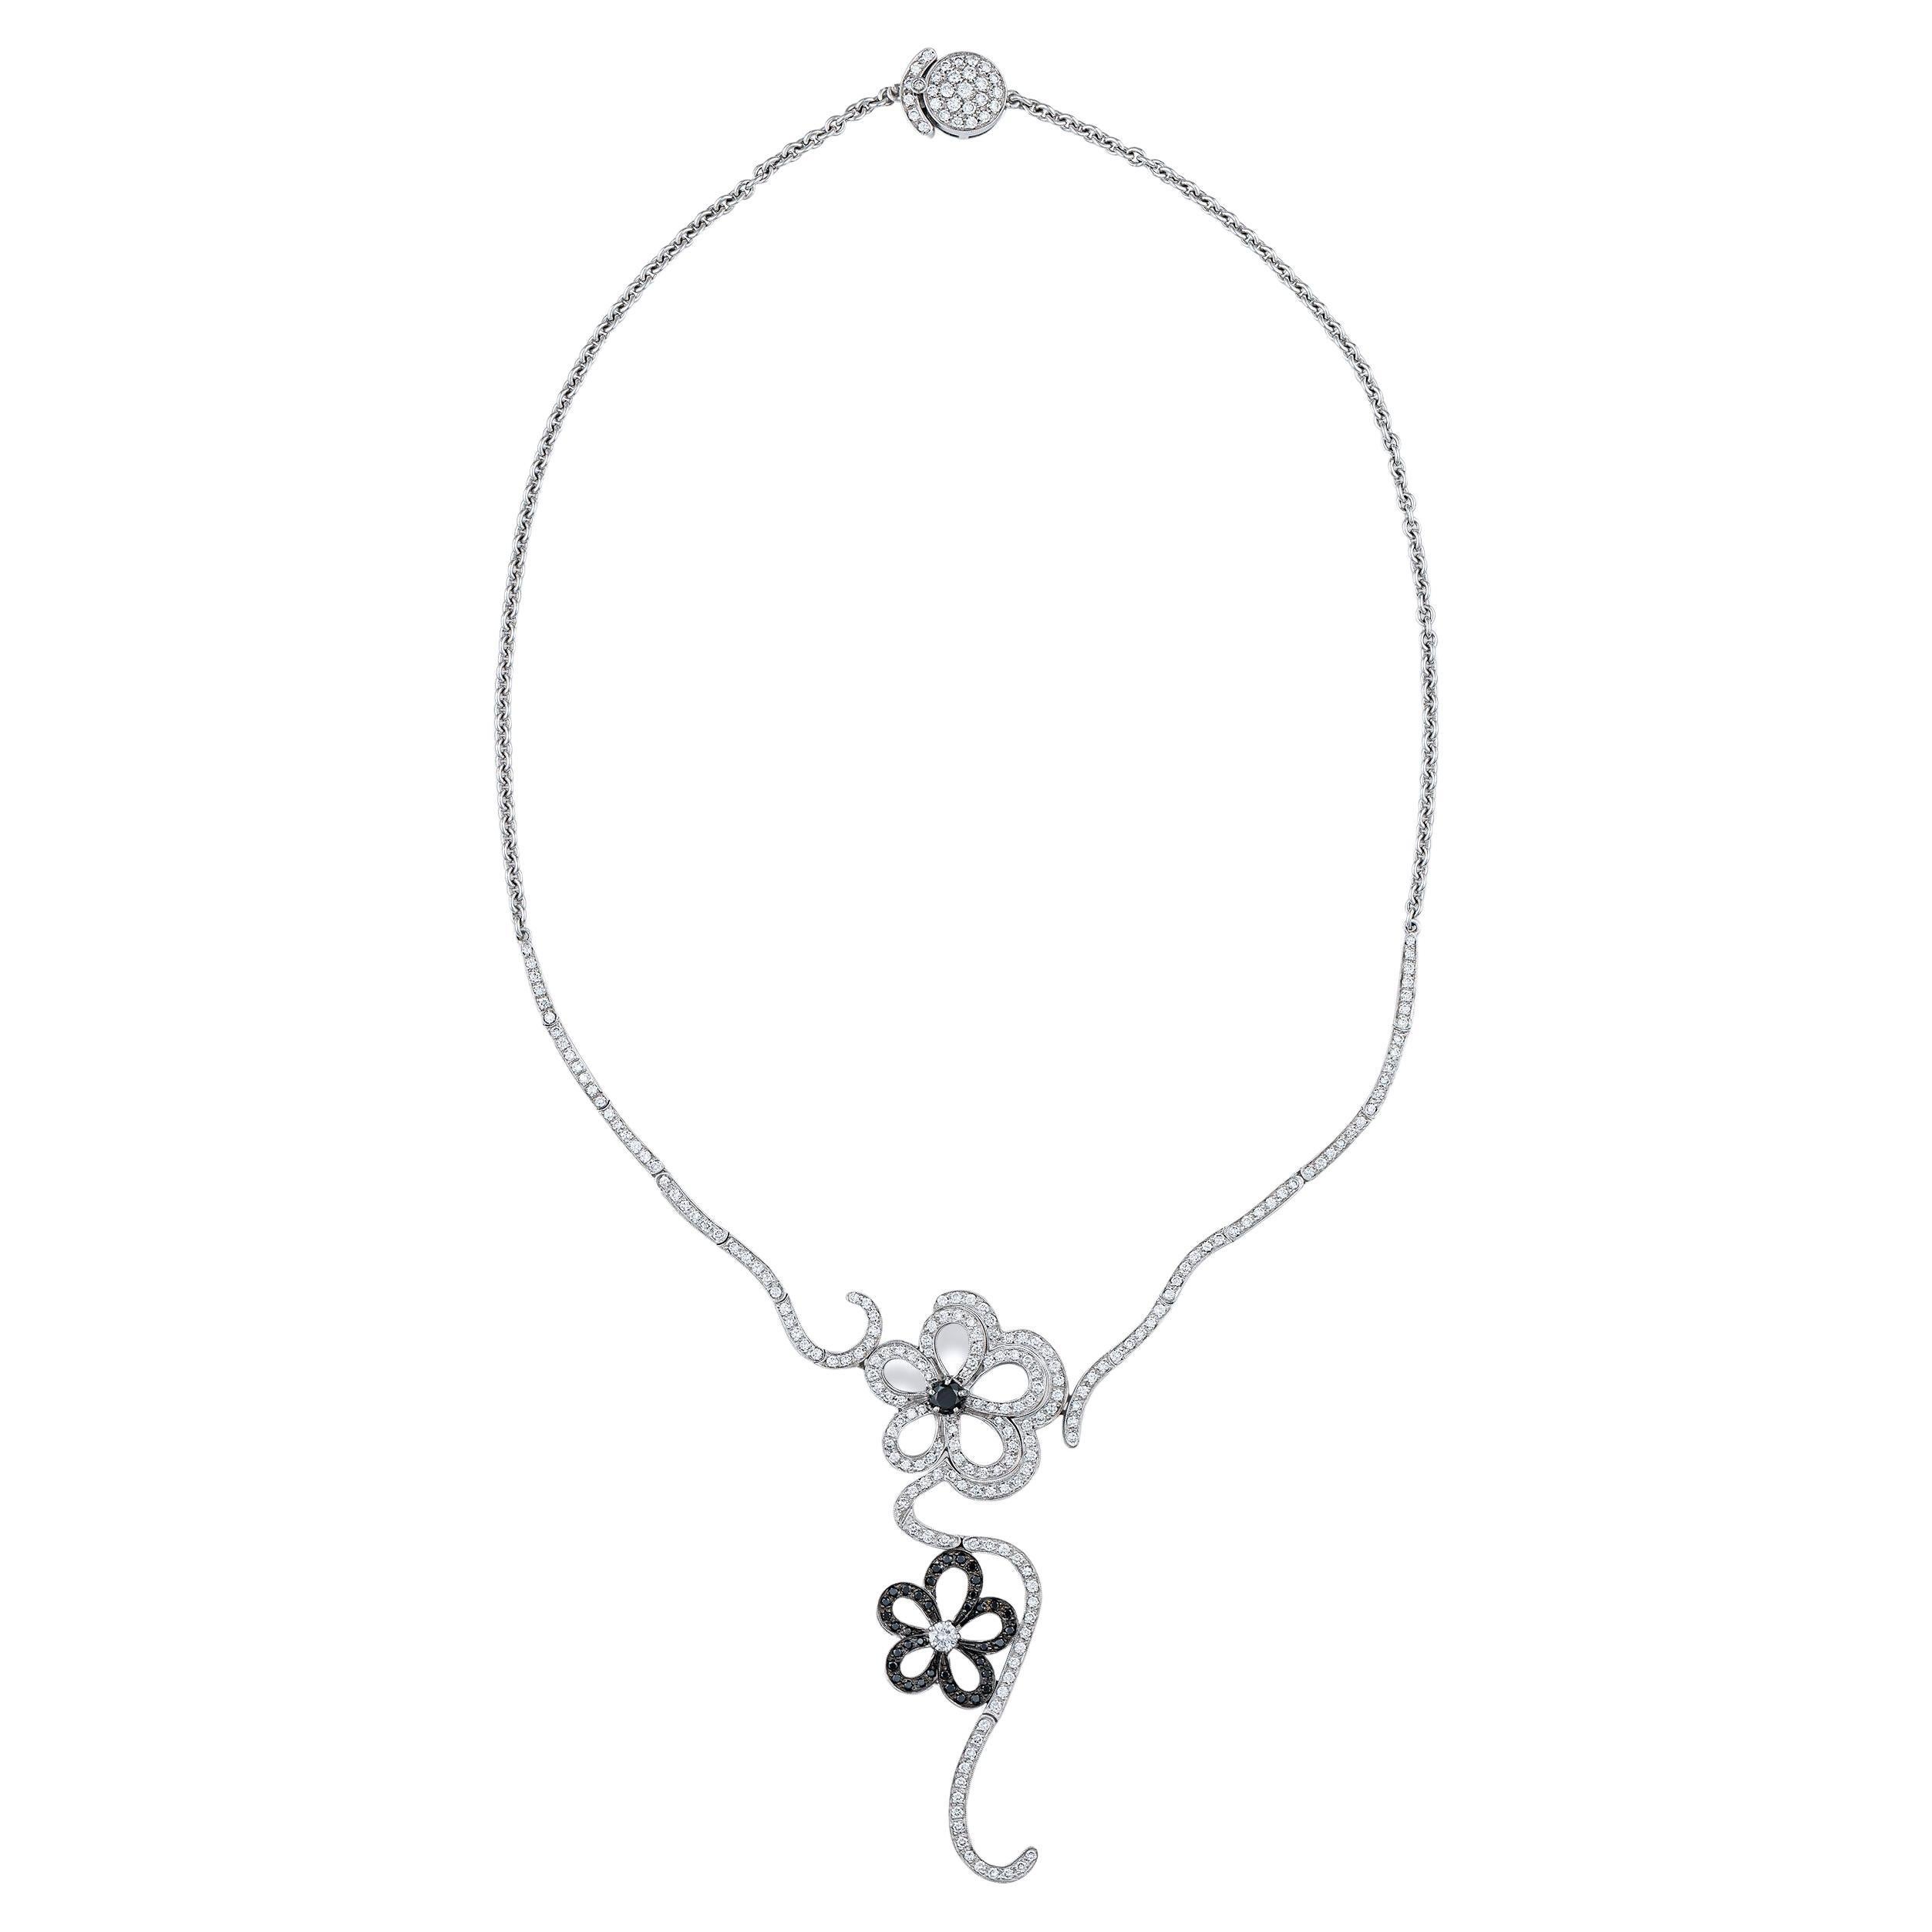 Floral Motif White and Black Diamond Necklace